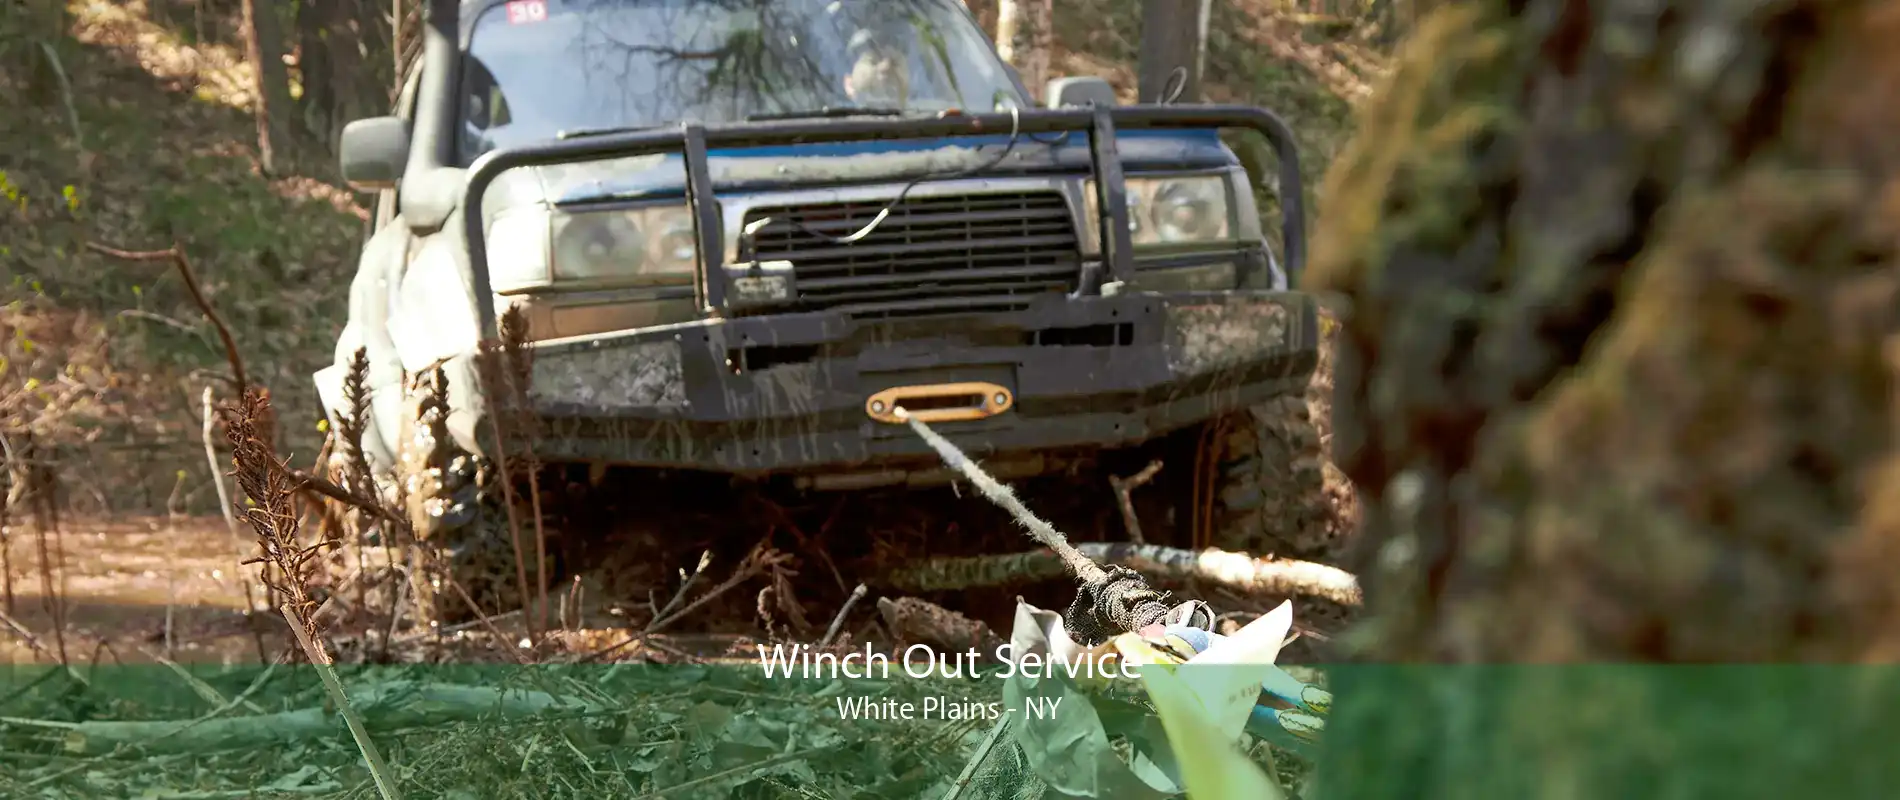 Winch Out Service White Plains - NY